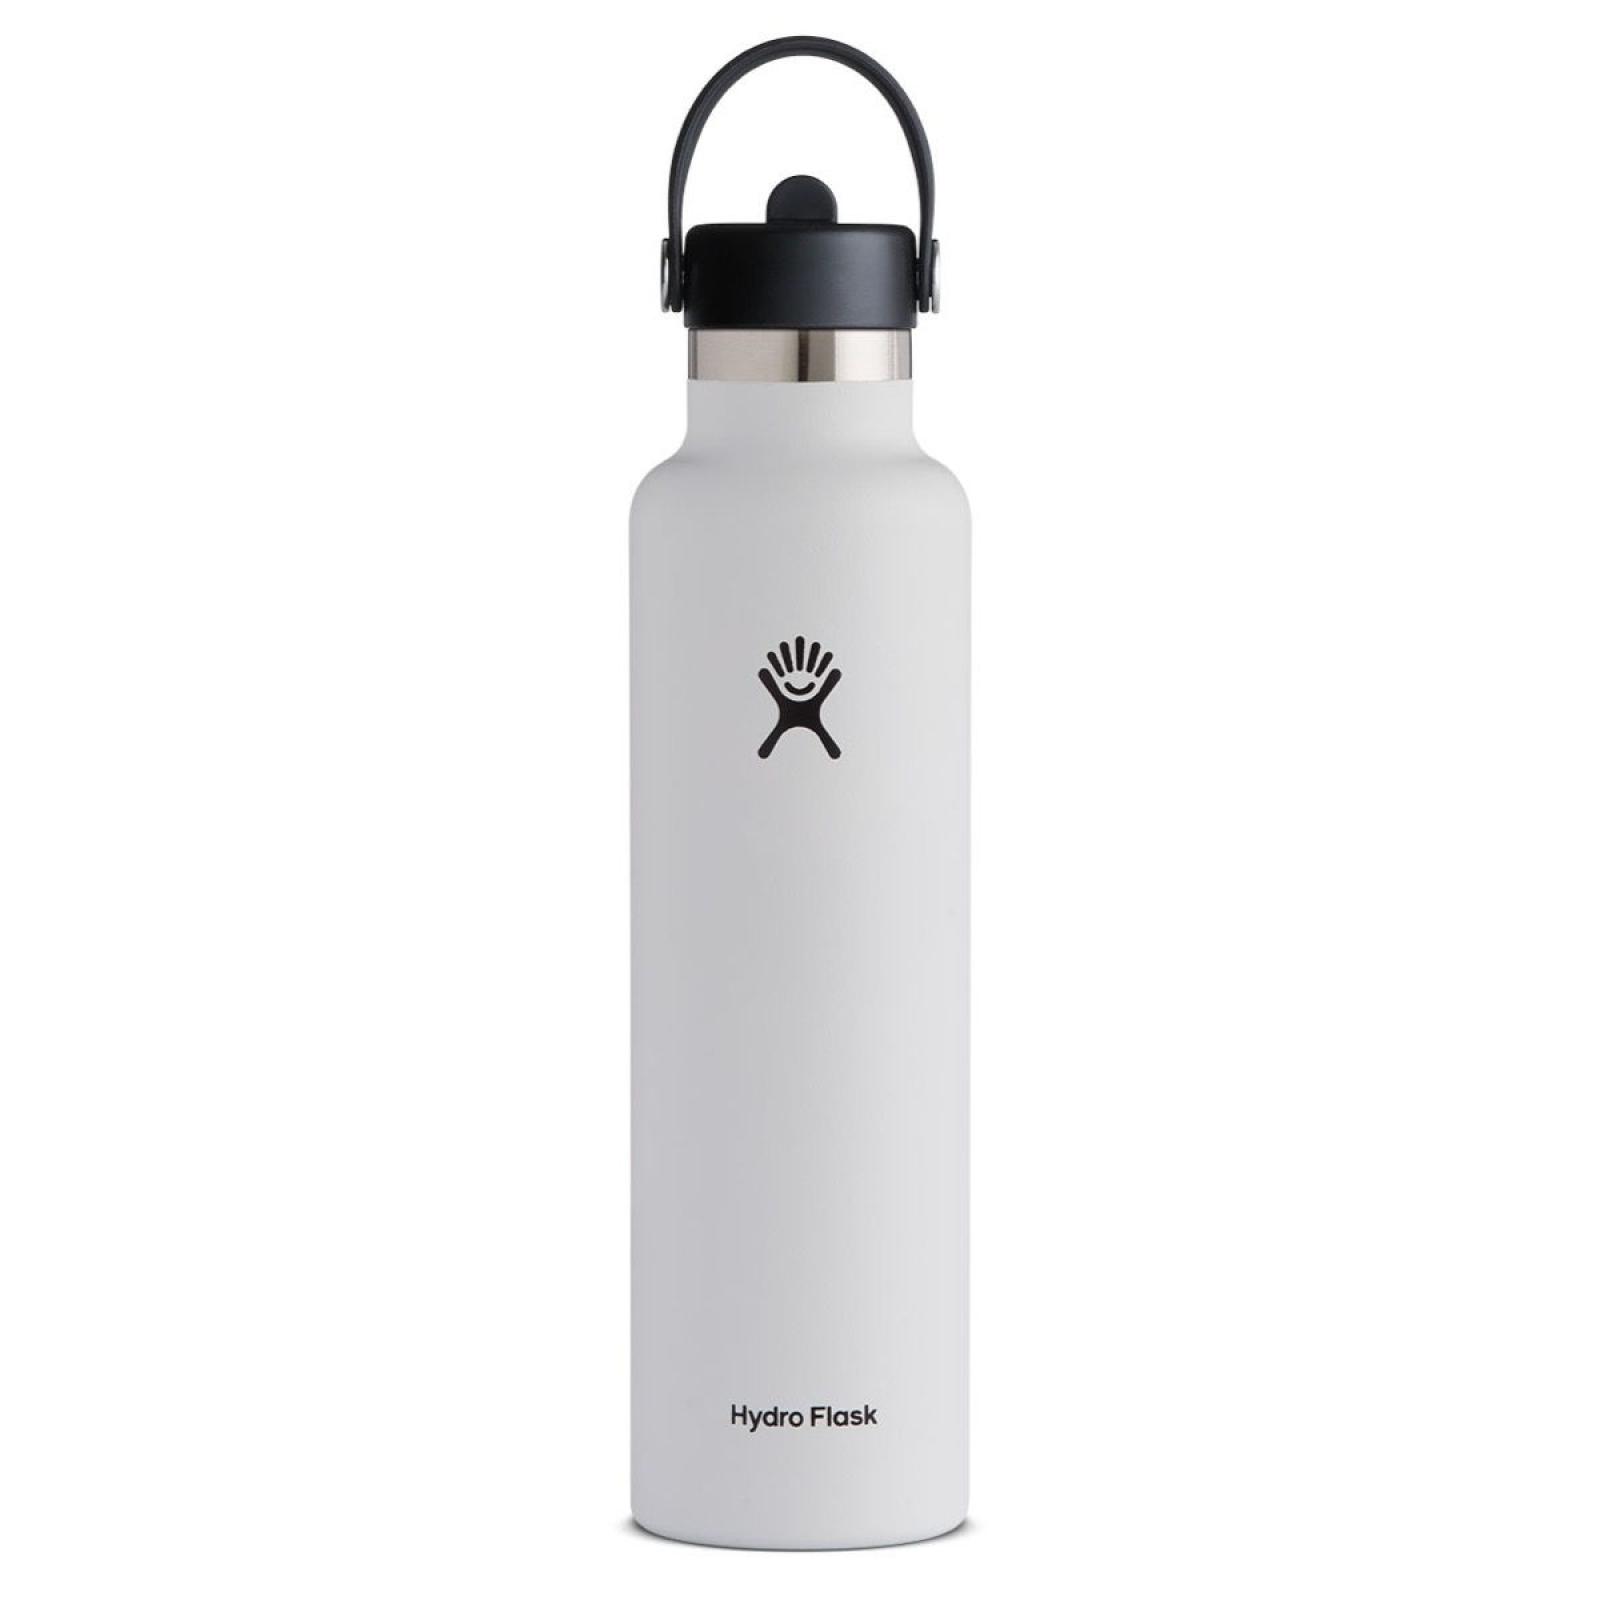 Hydro Flask Standard Mouth Bottle with Flex Straw